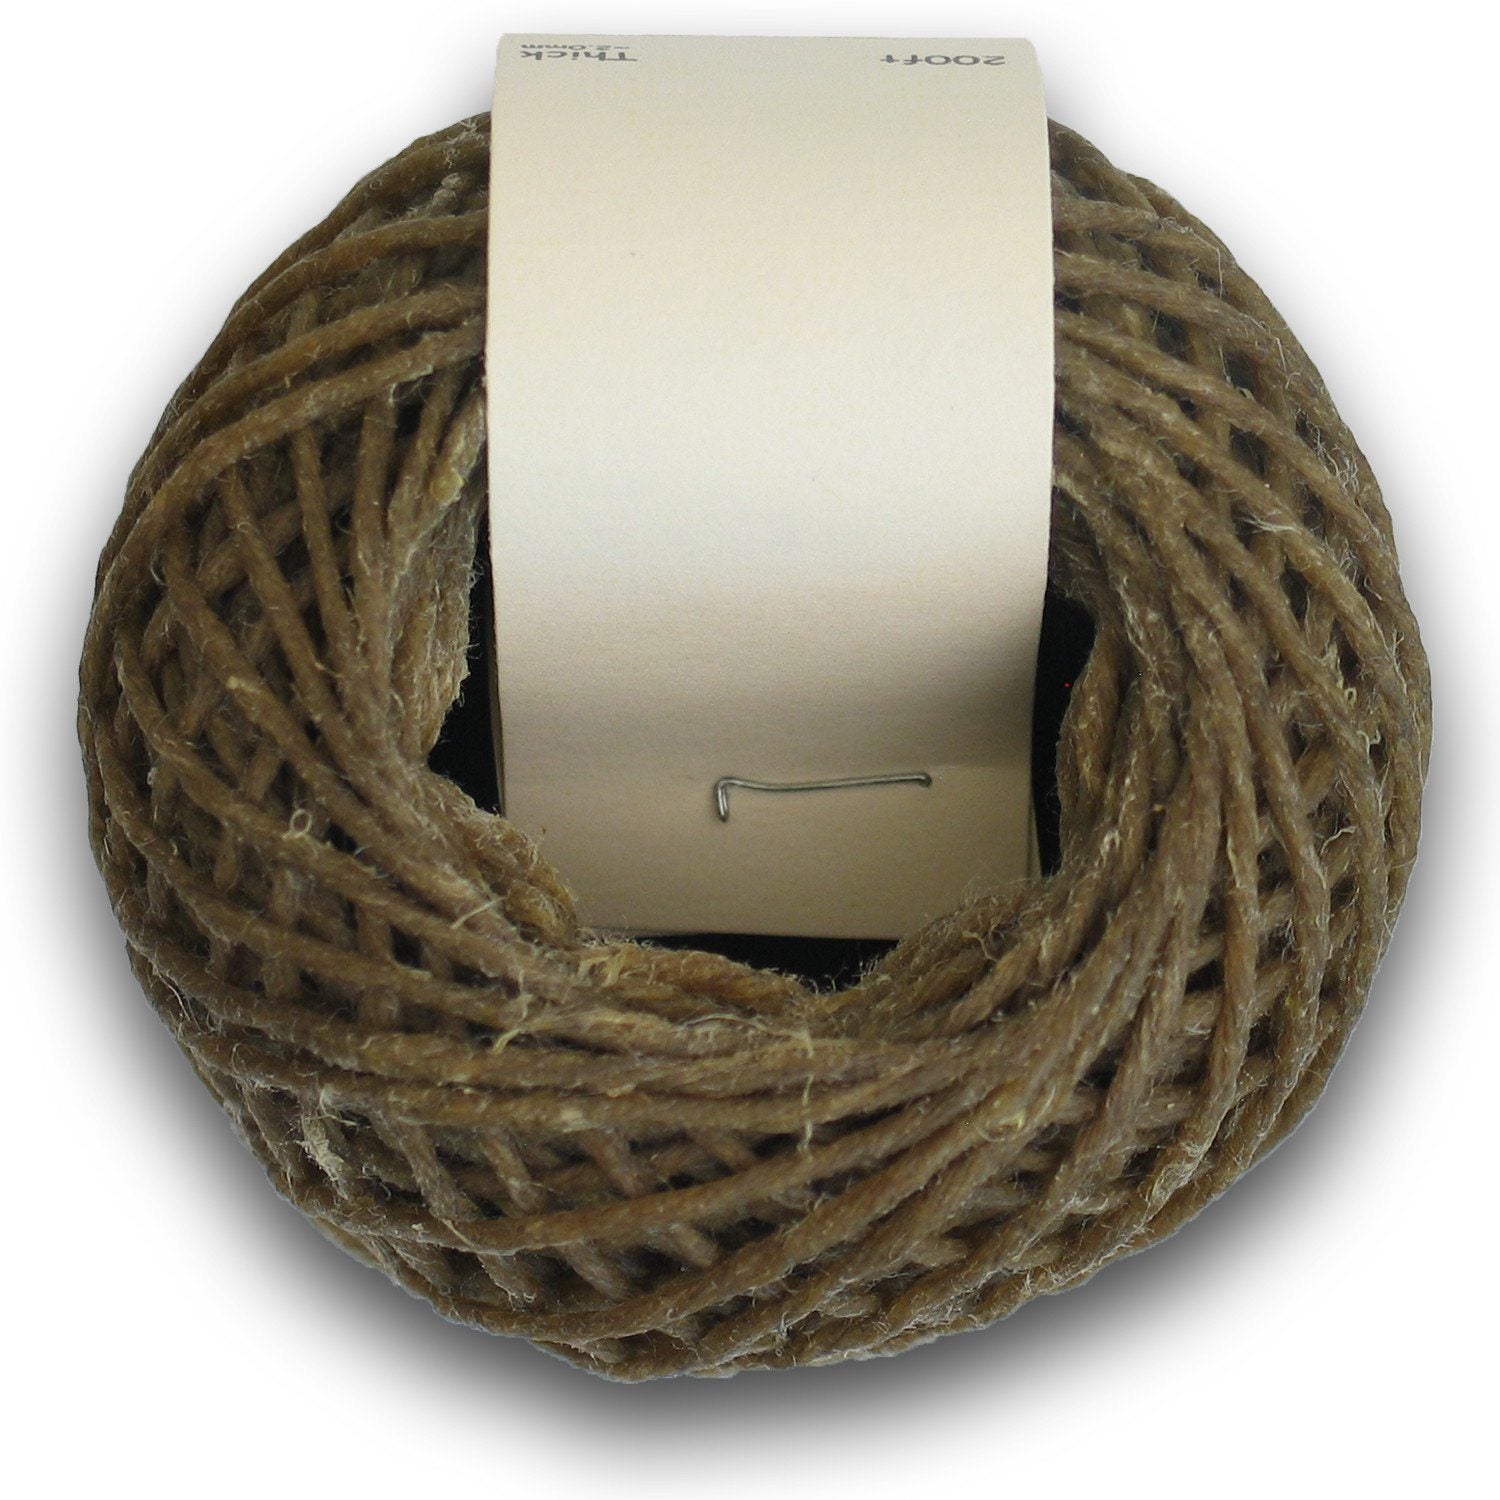 Twisted Bee Thick x 200ft, Organic Hemp Wick with Natural Beeswax Coating